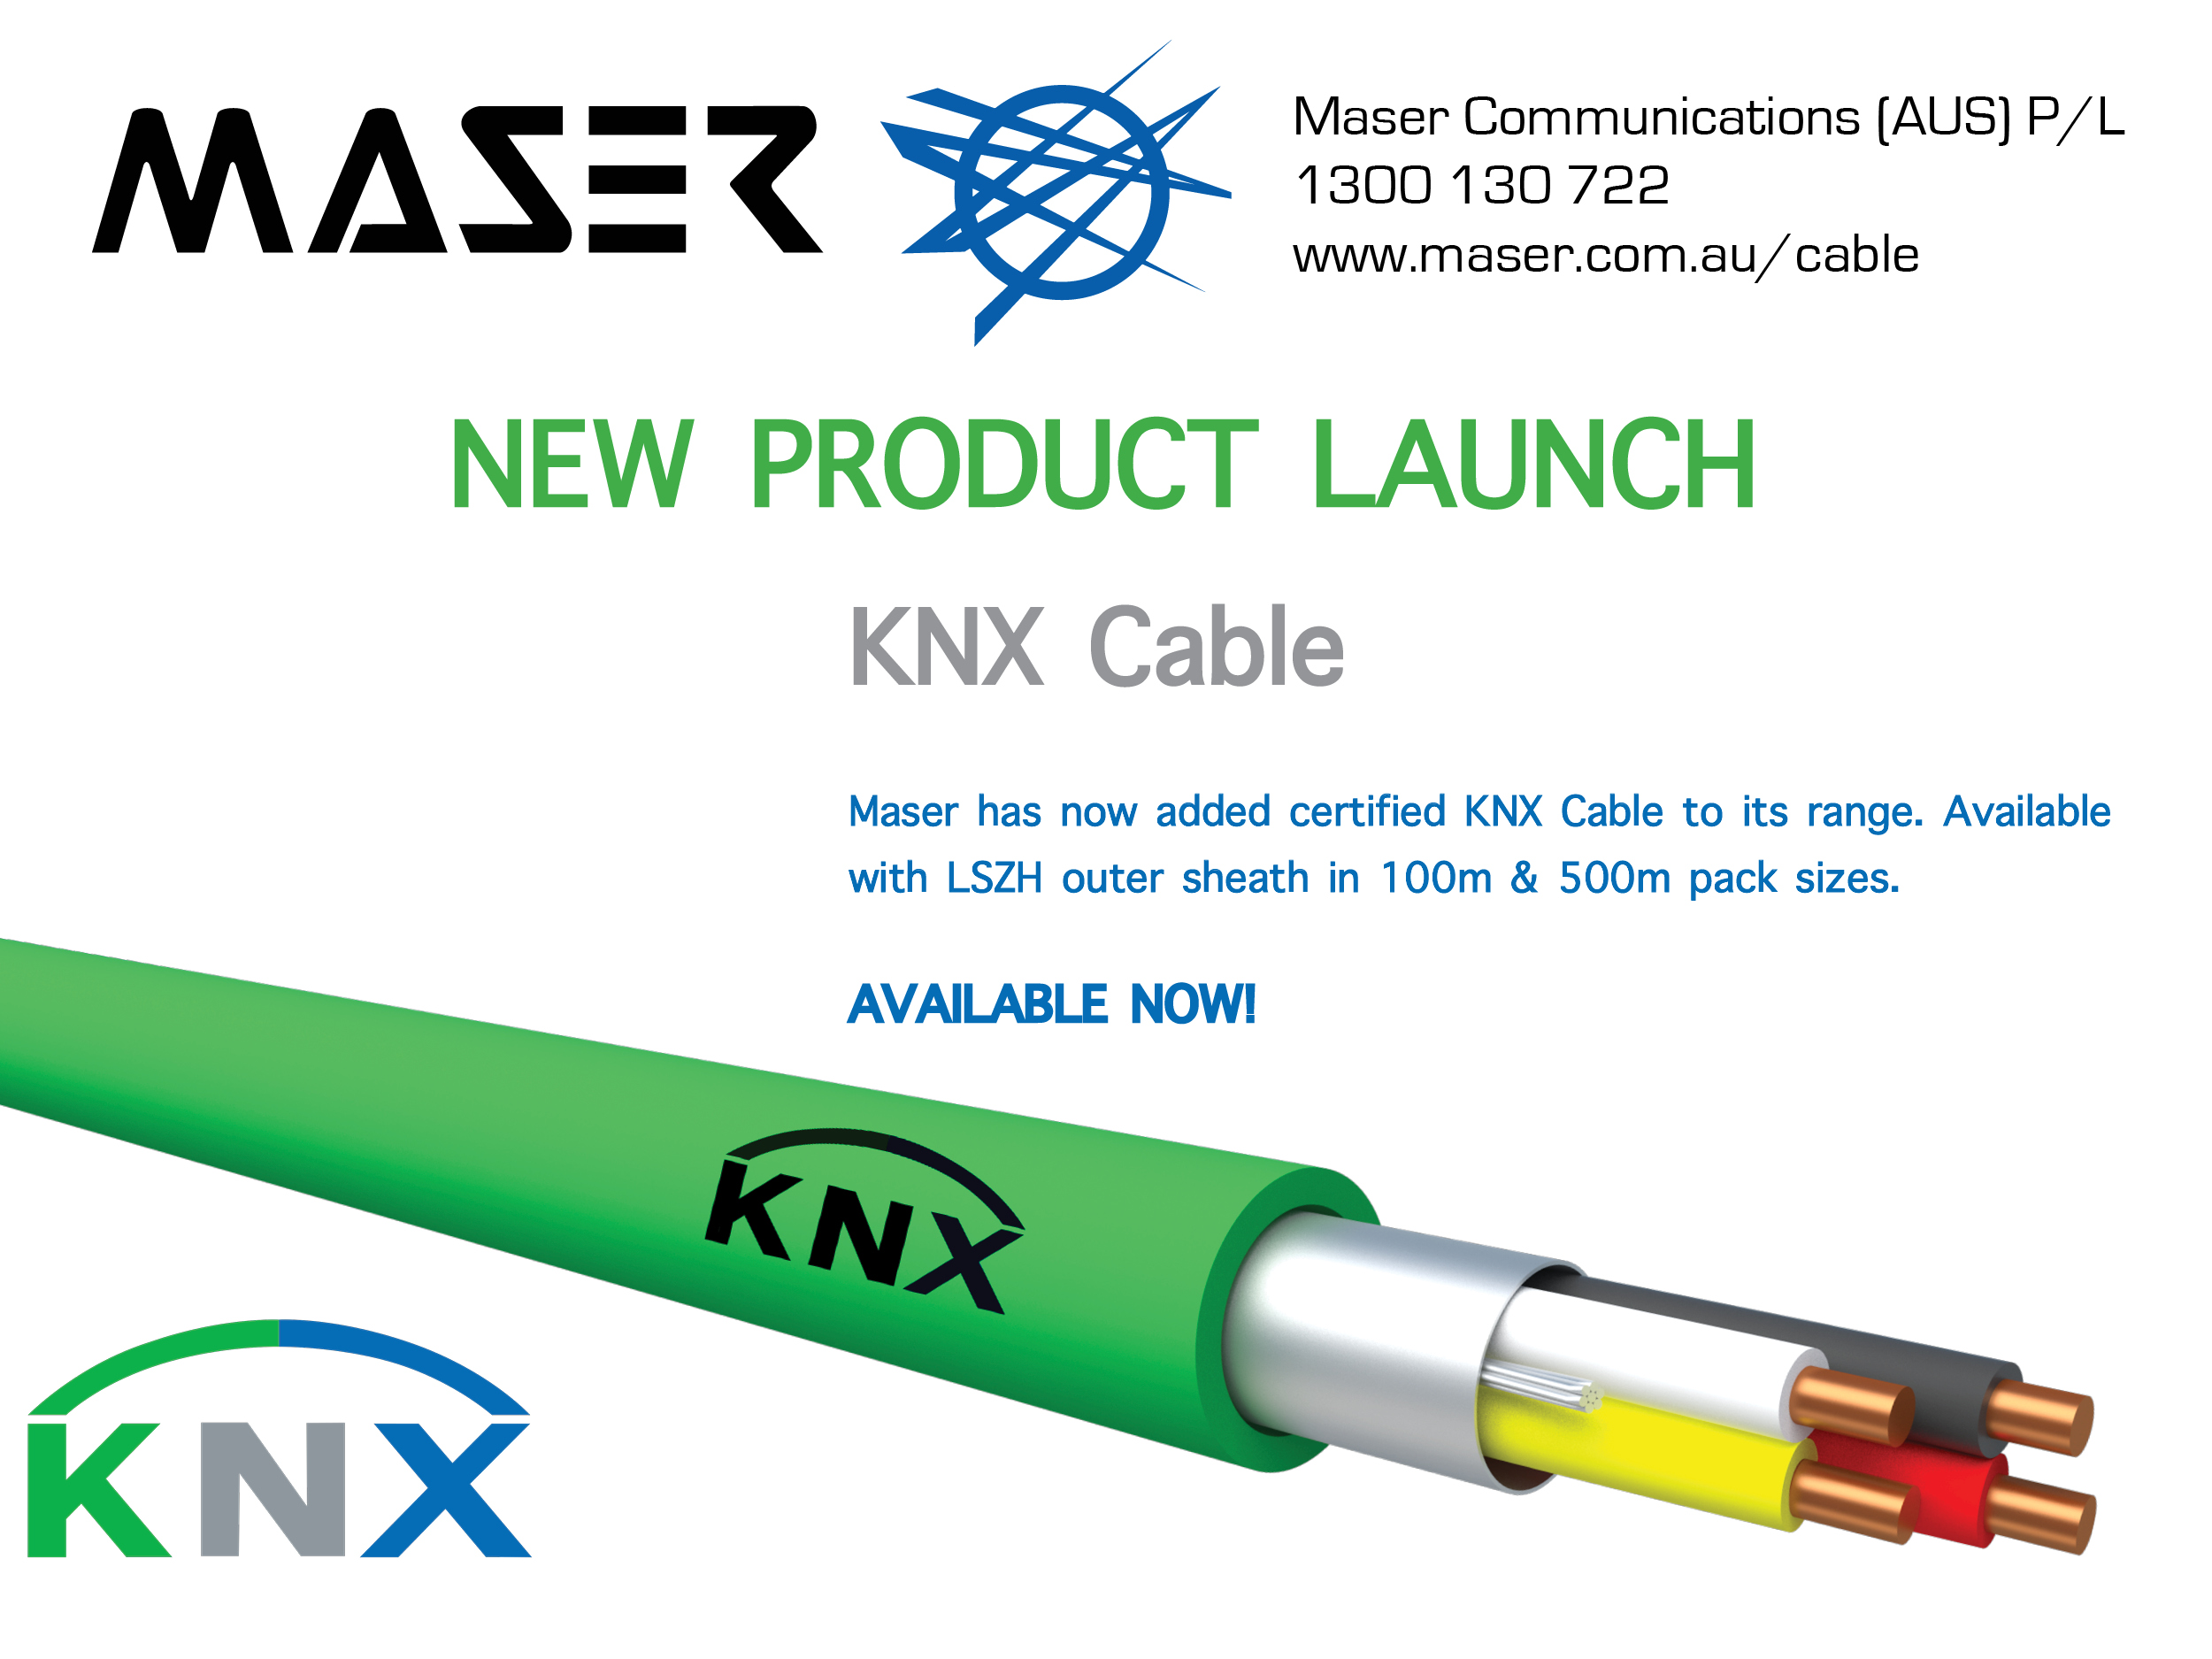 Maser adding KNX Cable to its range